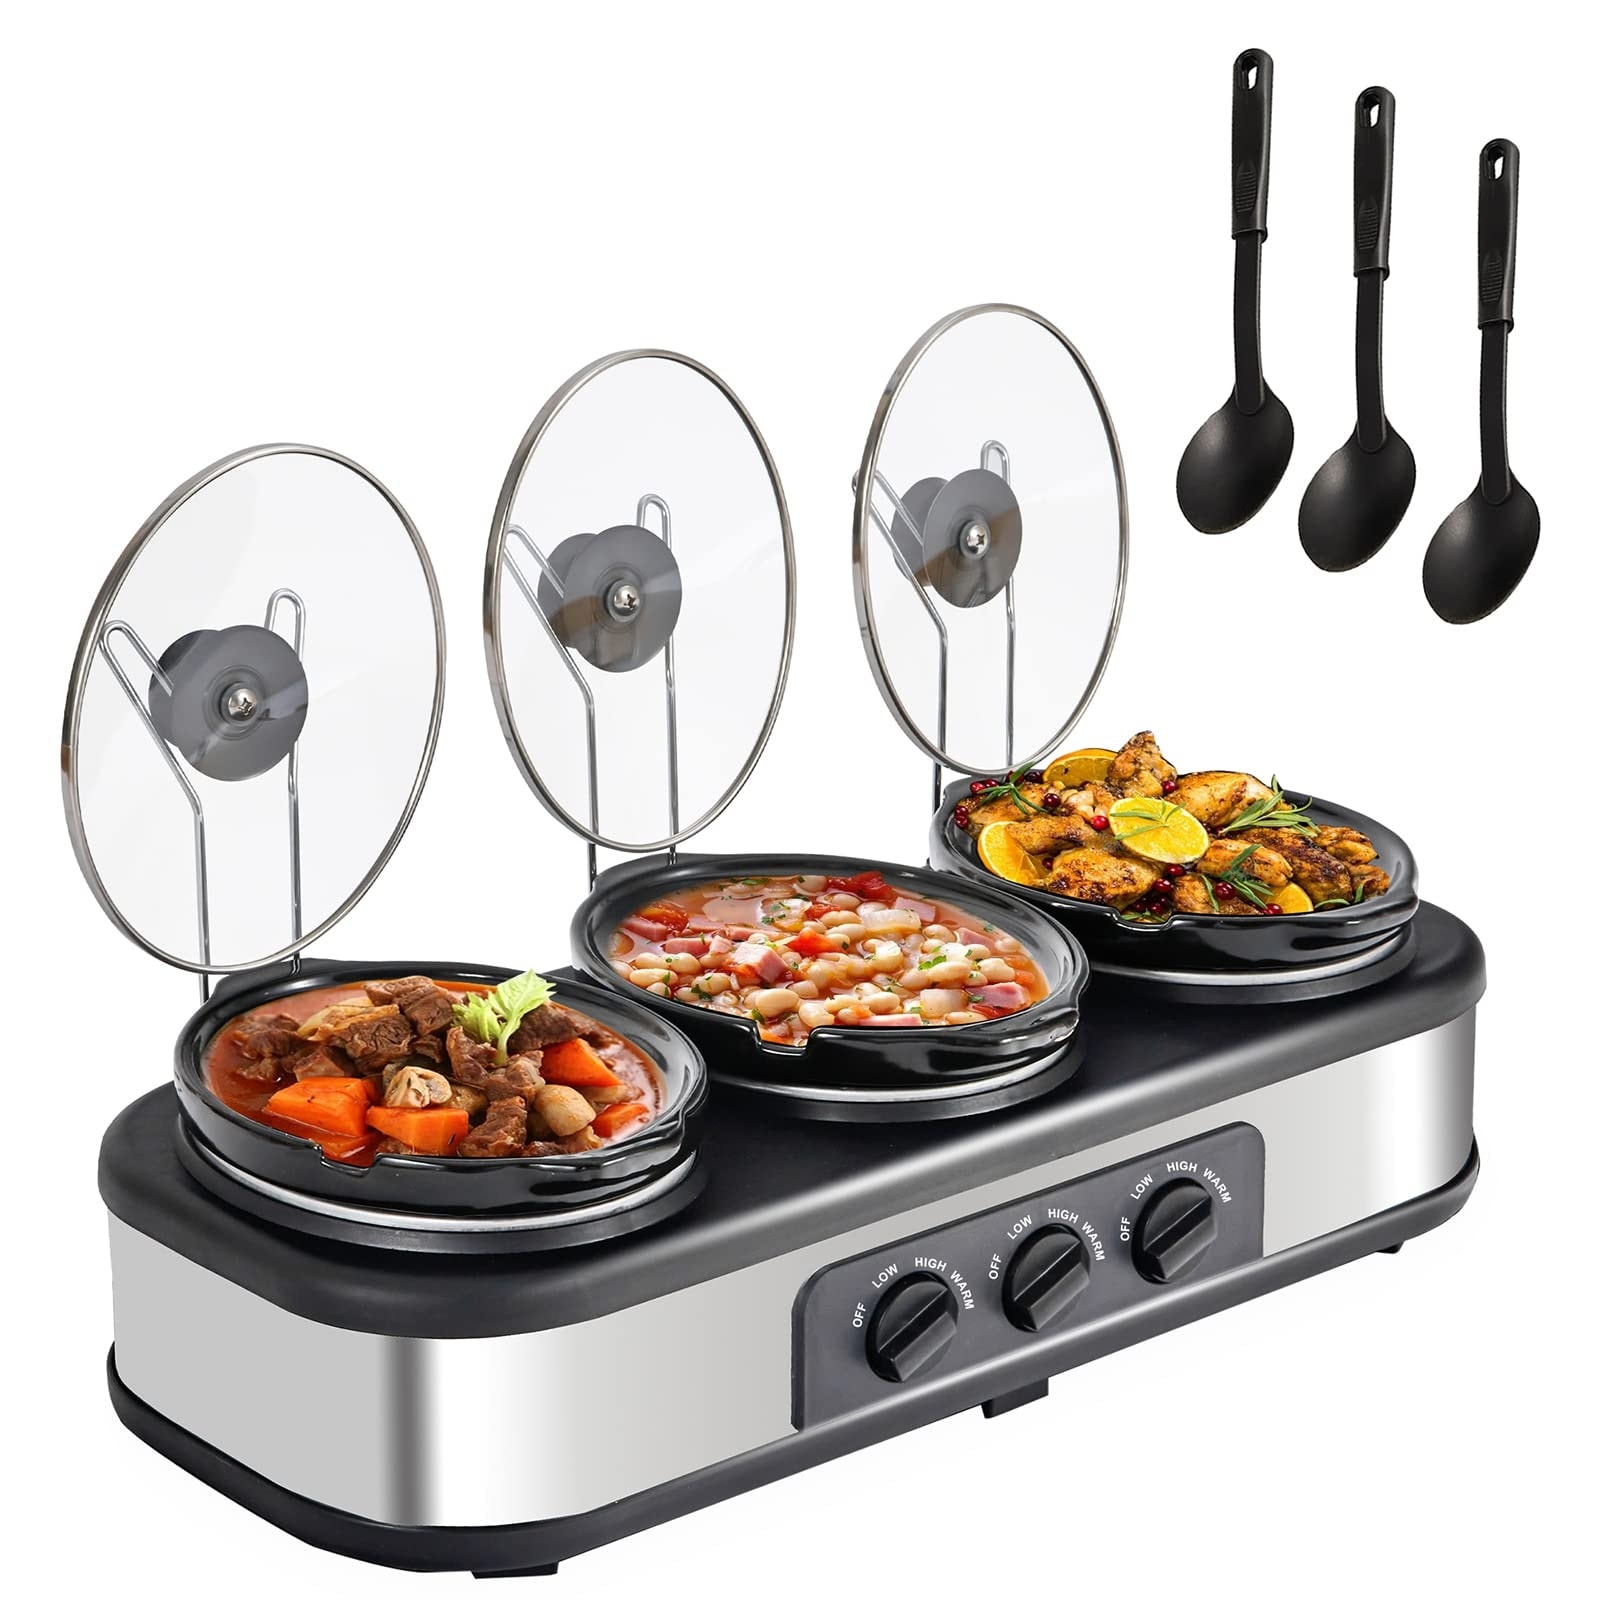 Triple Slow Cooker Buffet Servers and Warmer,3 Pot Food Mini Manual Slow  Cooker with Adjustable Temp, Lid Rests, Ceramic Pot - Bed Bath & Beyond -  39085866